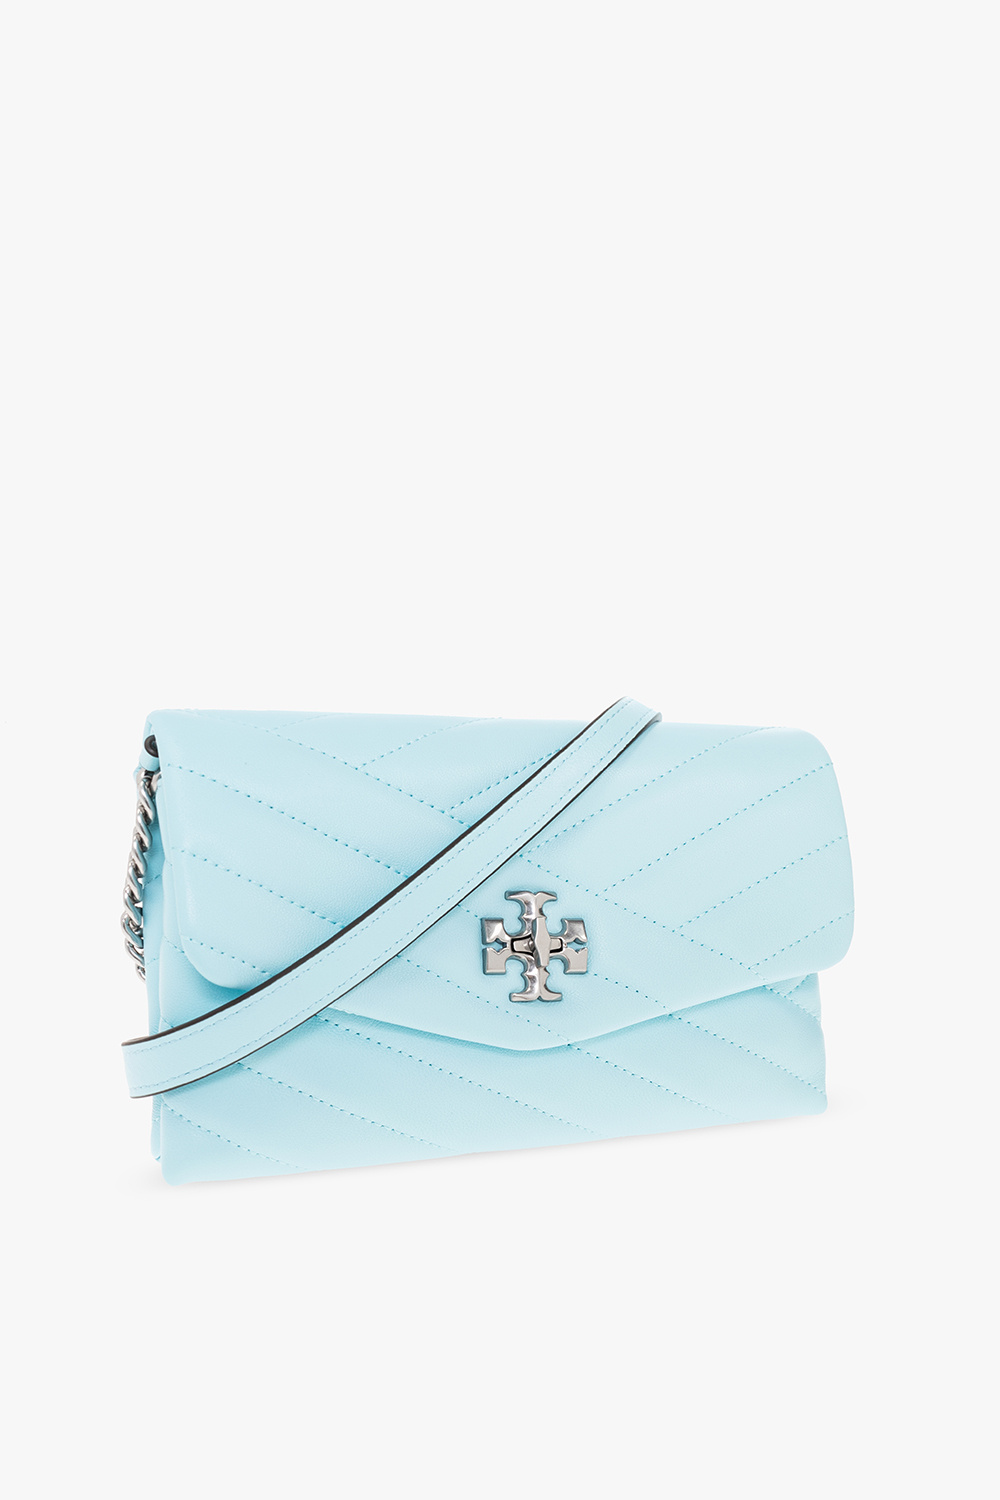 Light blue 'Kira' wallet with strap Tory Burch - InteragencyboardShops Italy